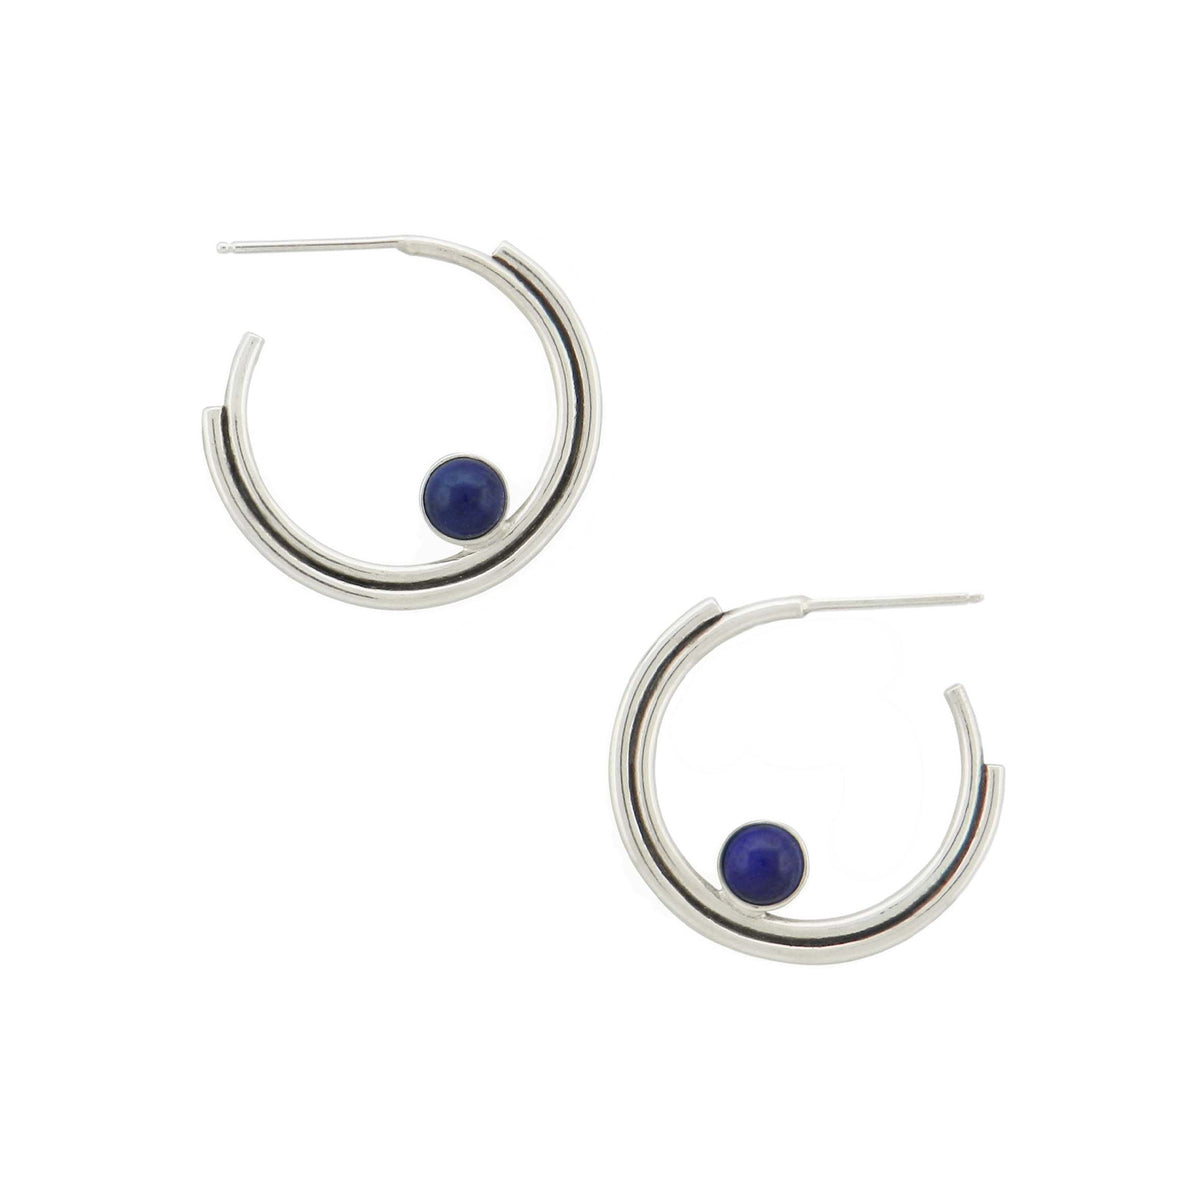 Side view of the Silver Arc Hoops with Stone.